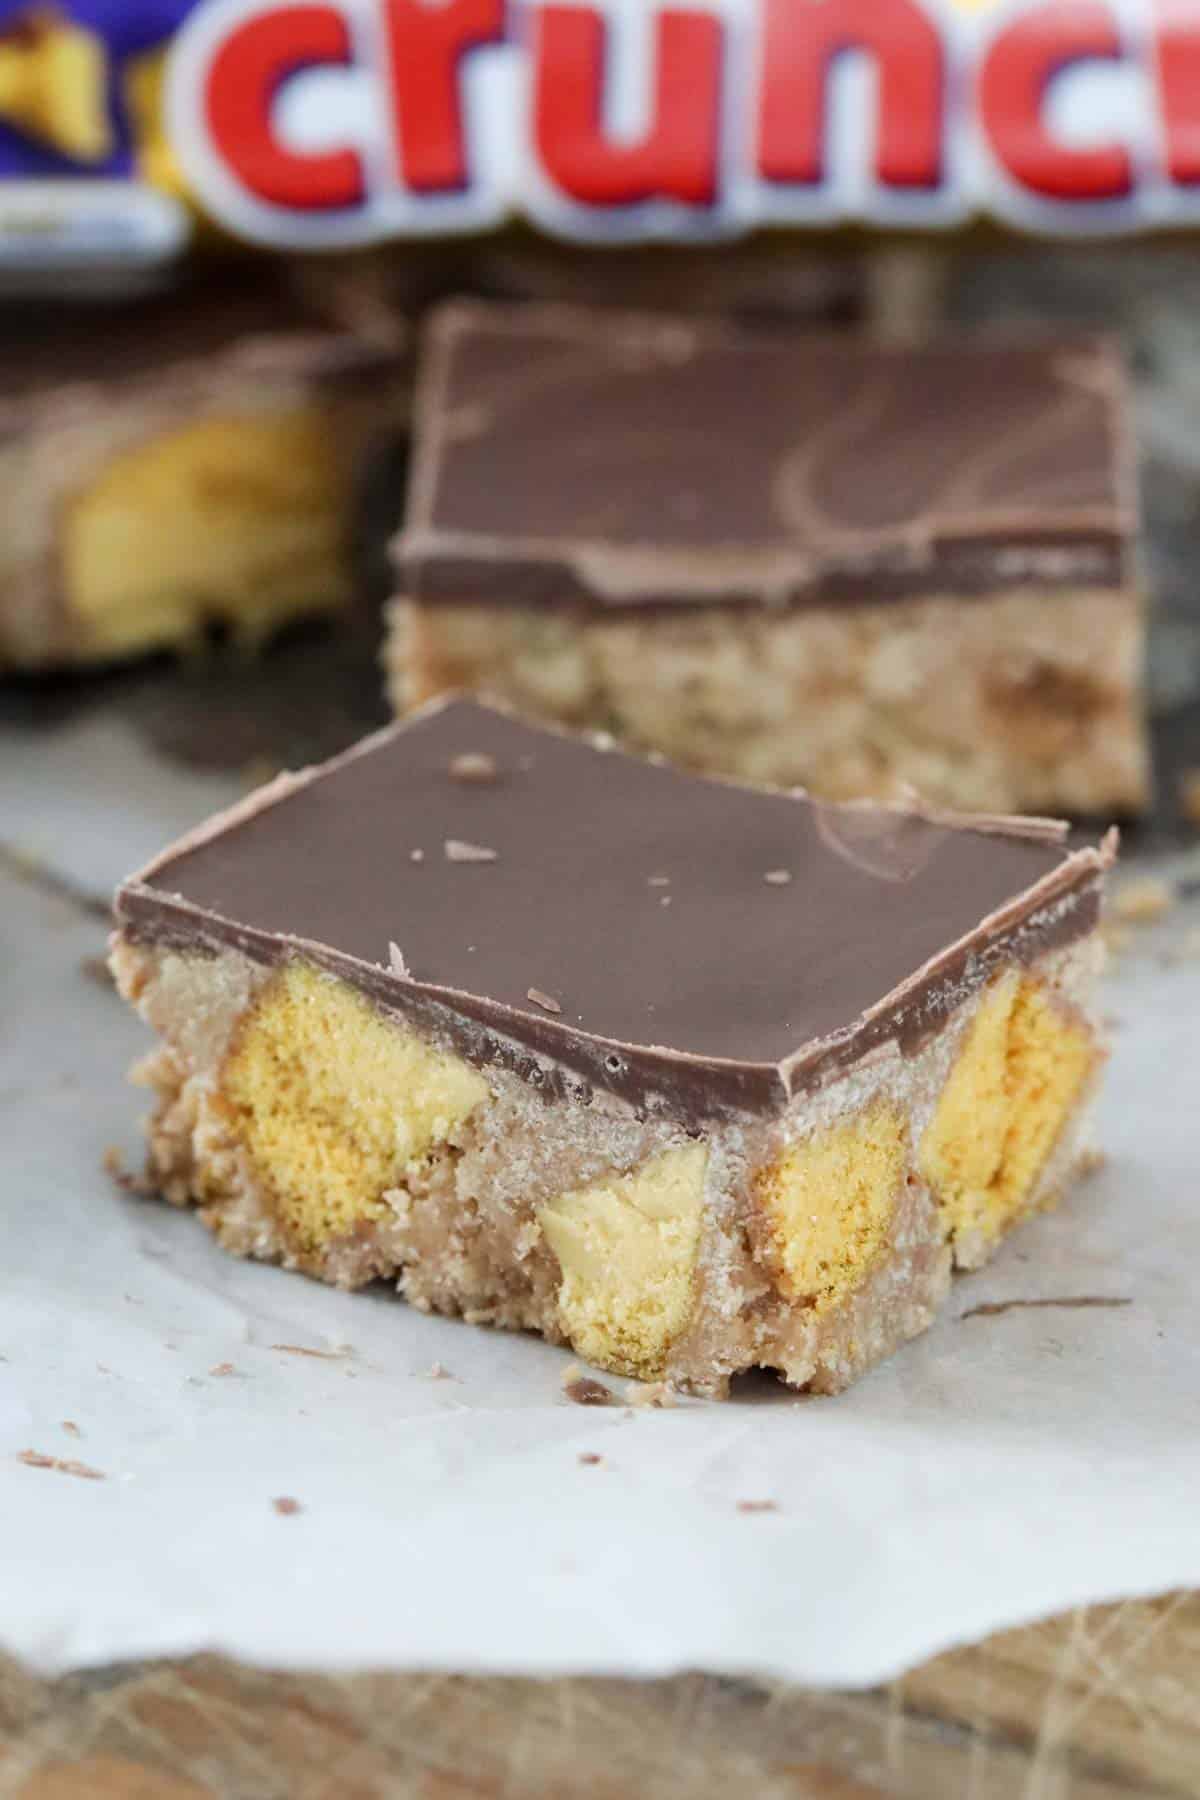 Chunks of honeycomb in a no-bake slice.